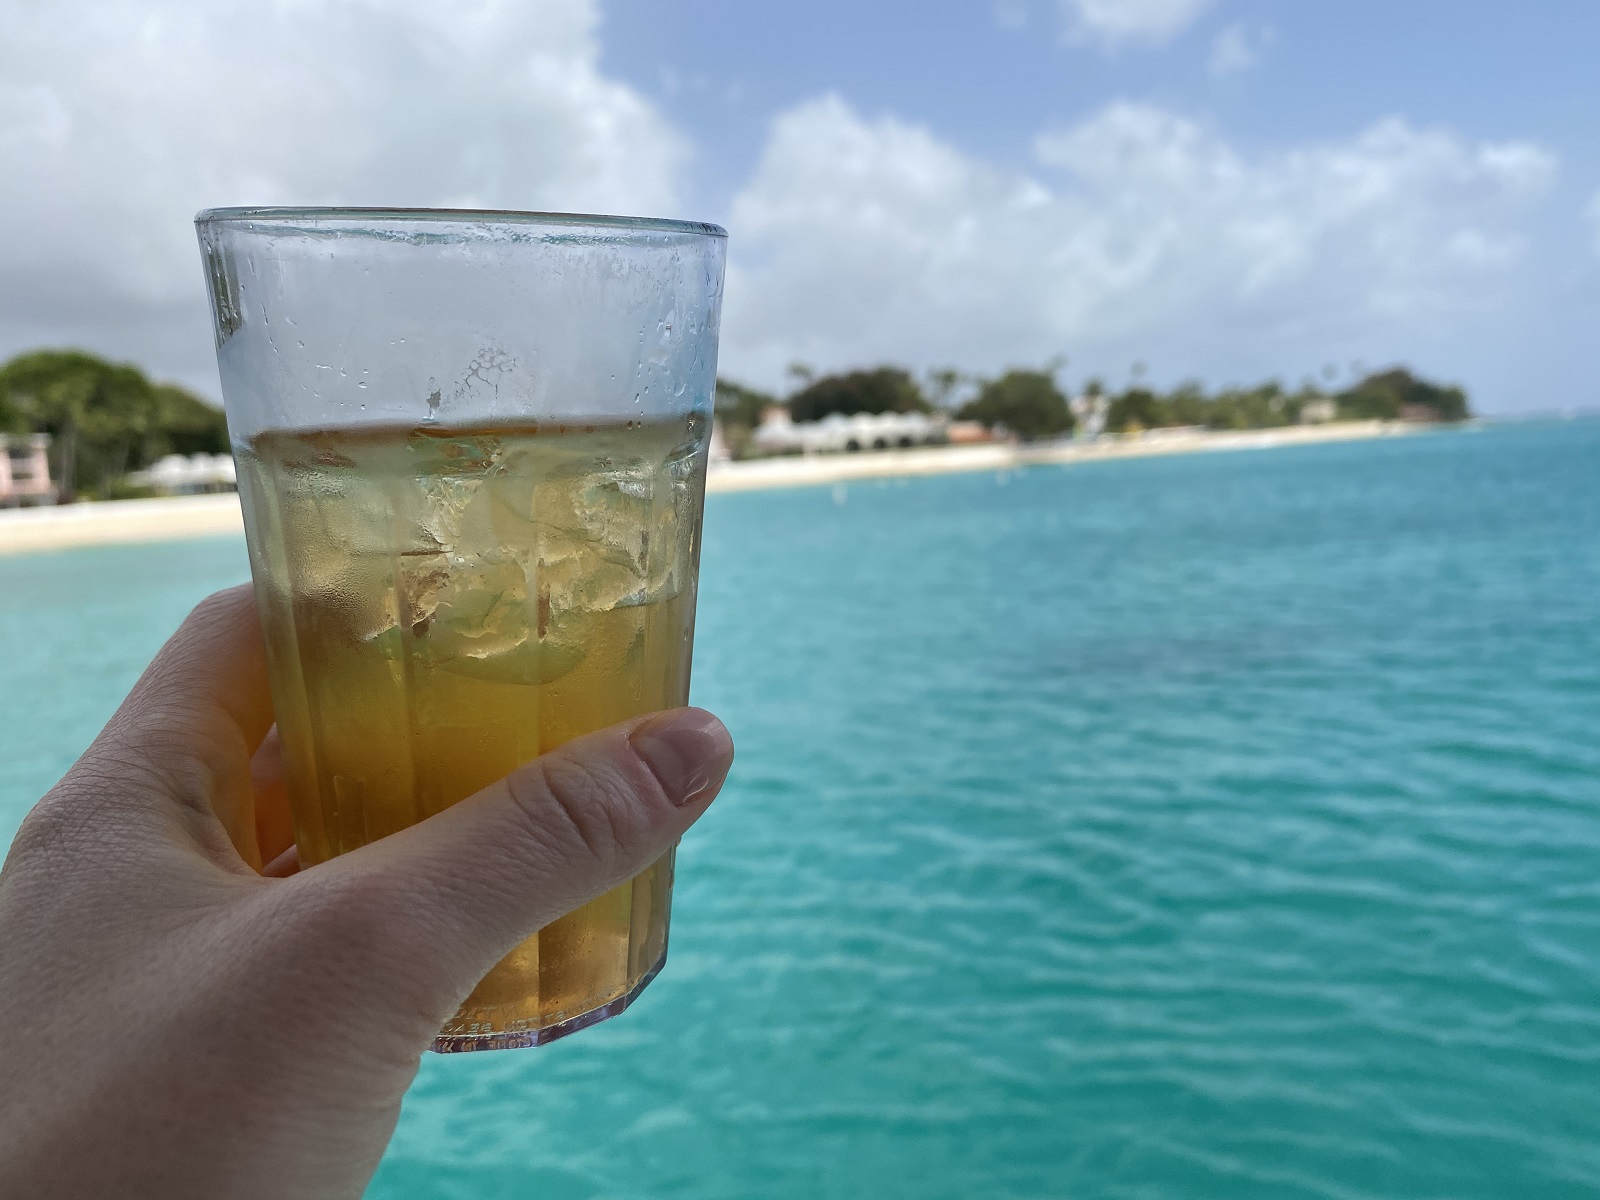 Lunch and unlimited beverages (including alcohol, like this rum punch) were covered in the price of the excursion.